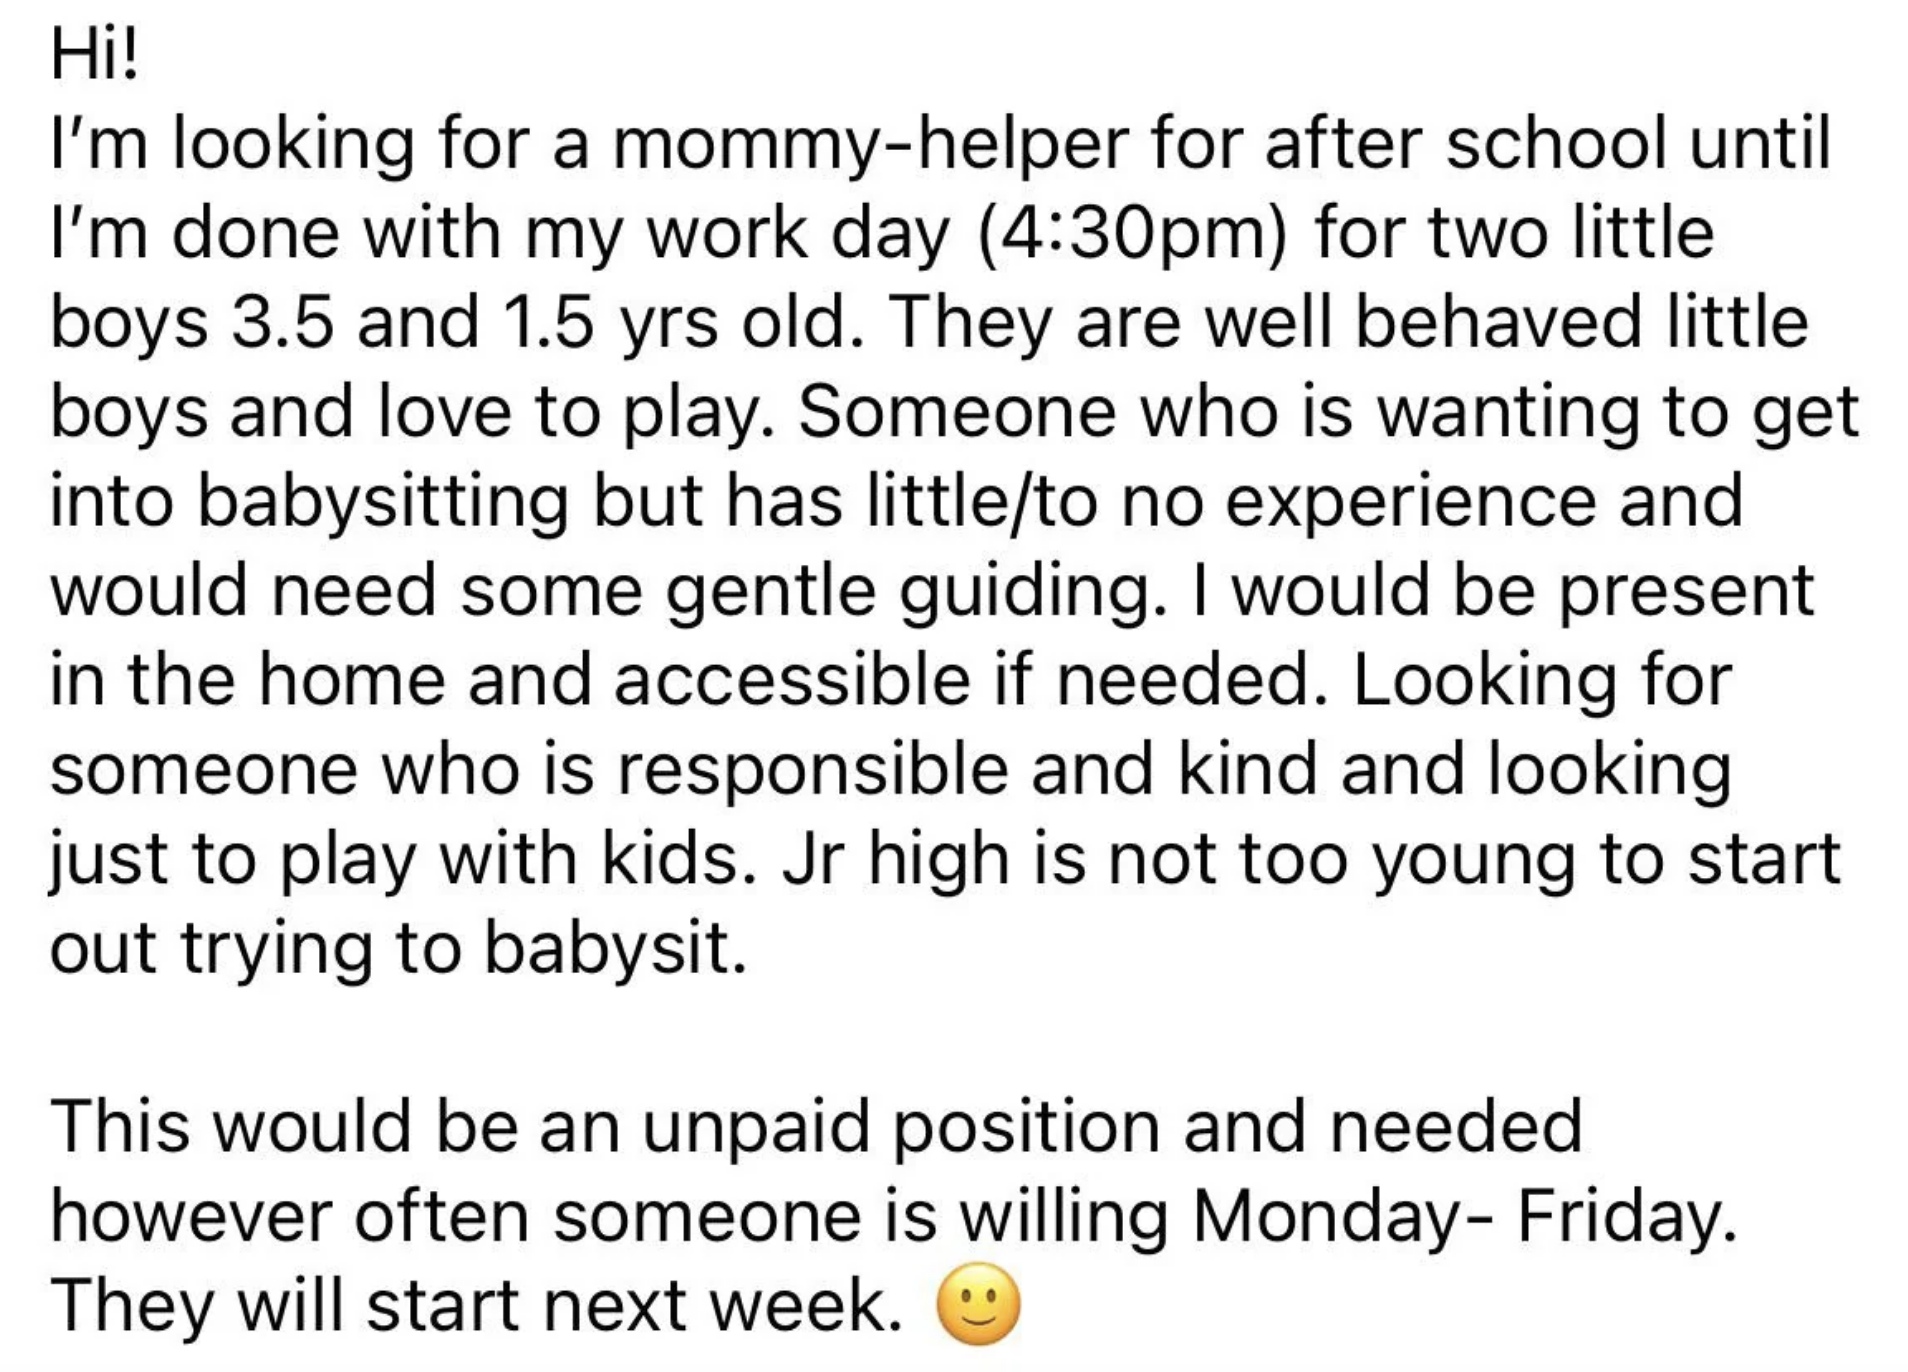 A posting for an unpaid helper to babysit two young boys after school, Monday–Friday — the mom would be in the home if needed; just need someone, maybe in jr high, who is responsible and kind and looking to play with kids